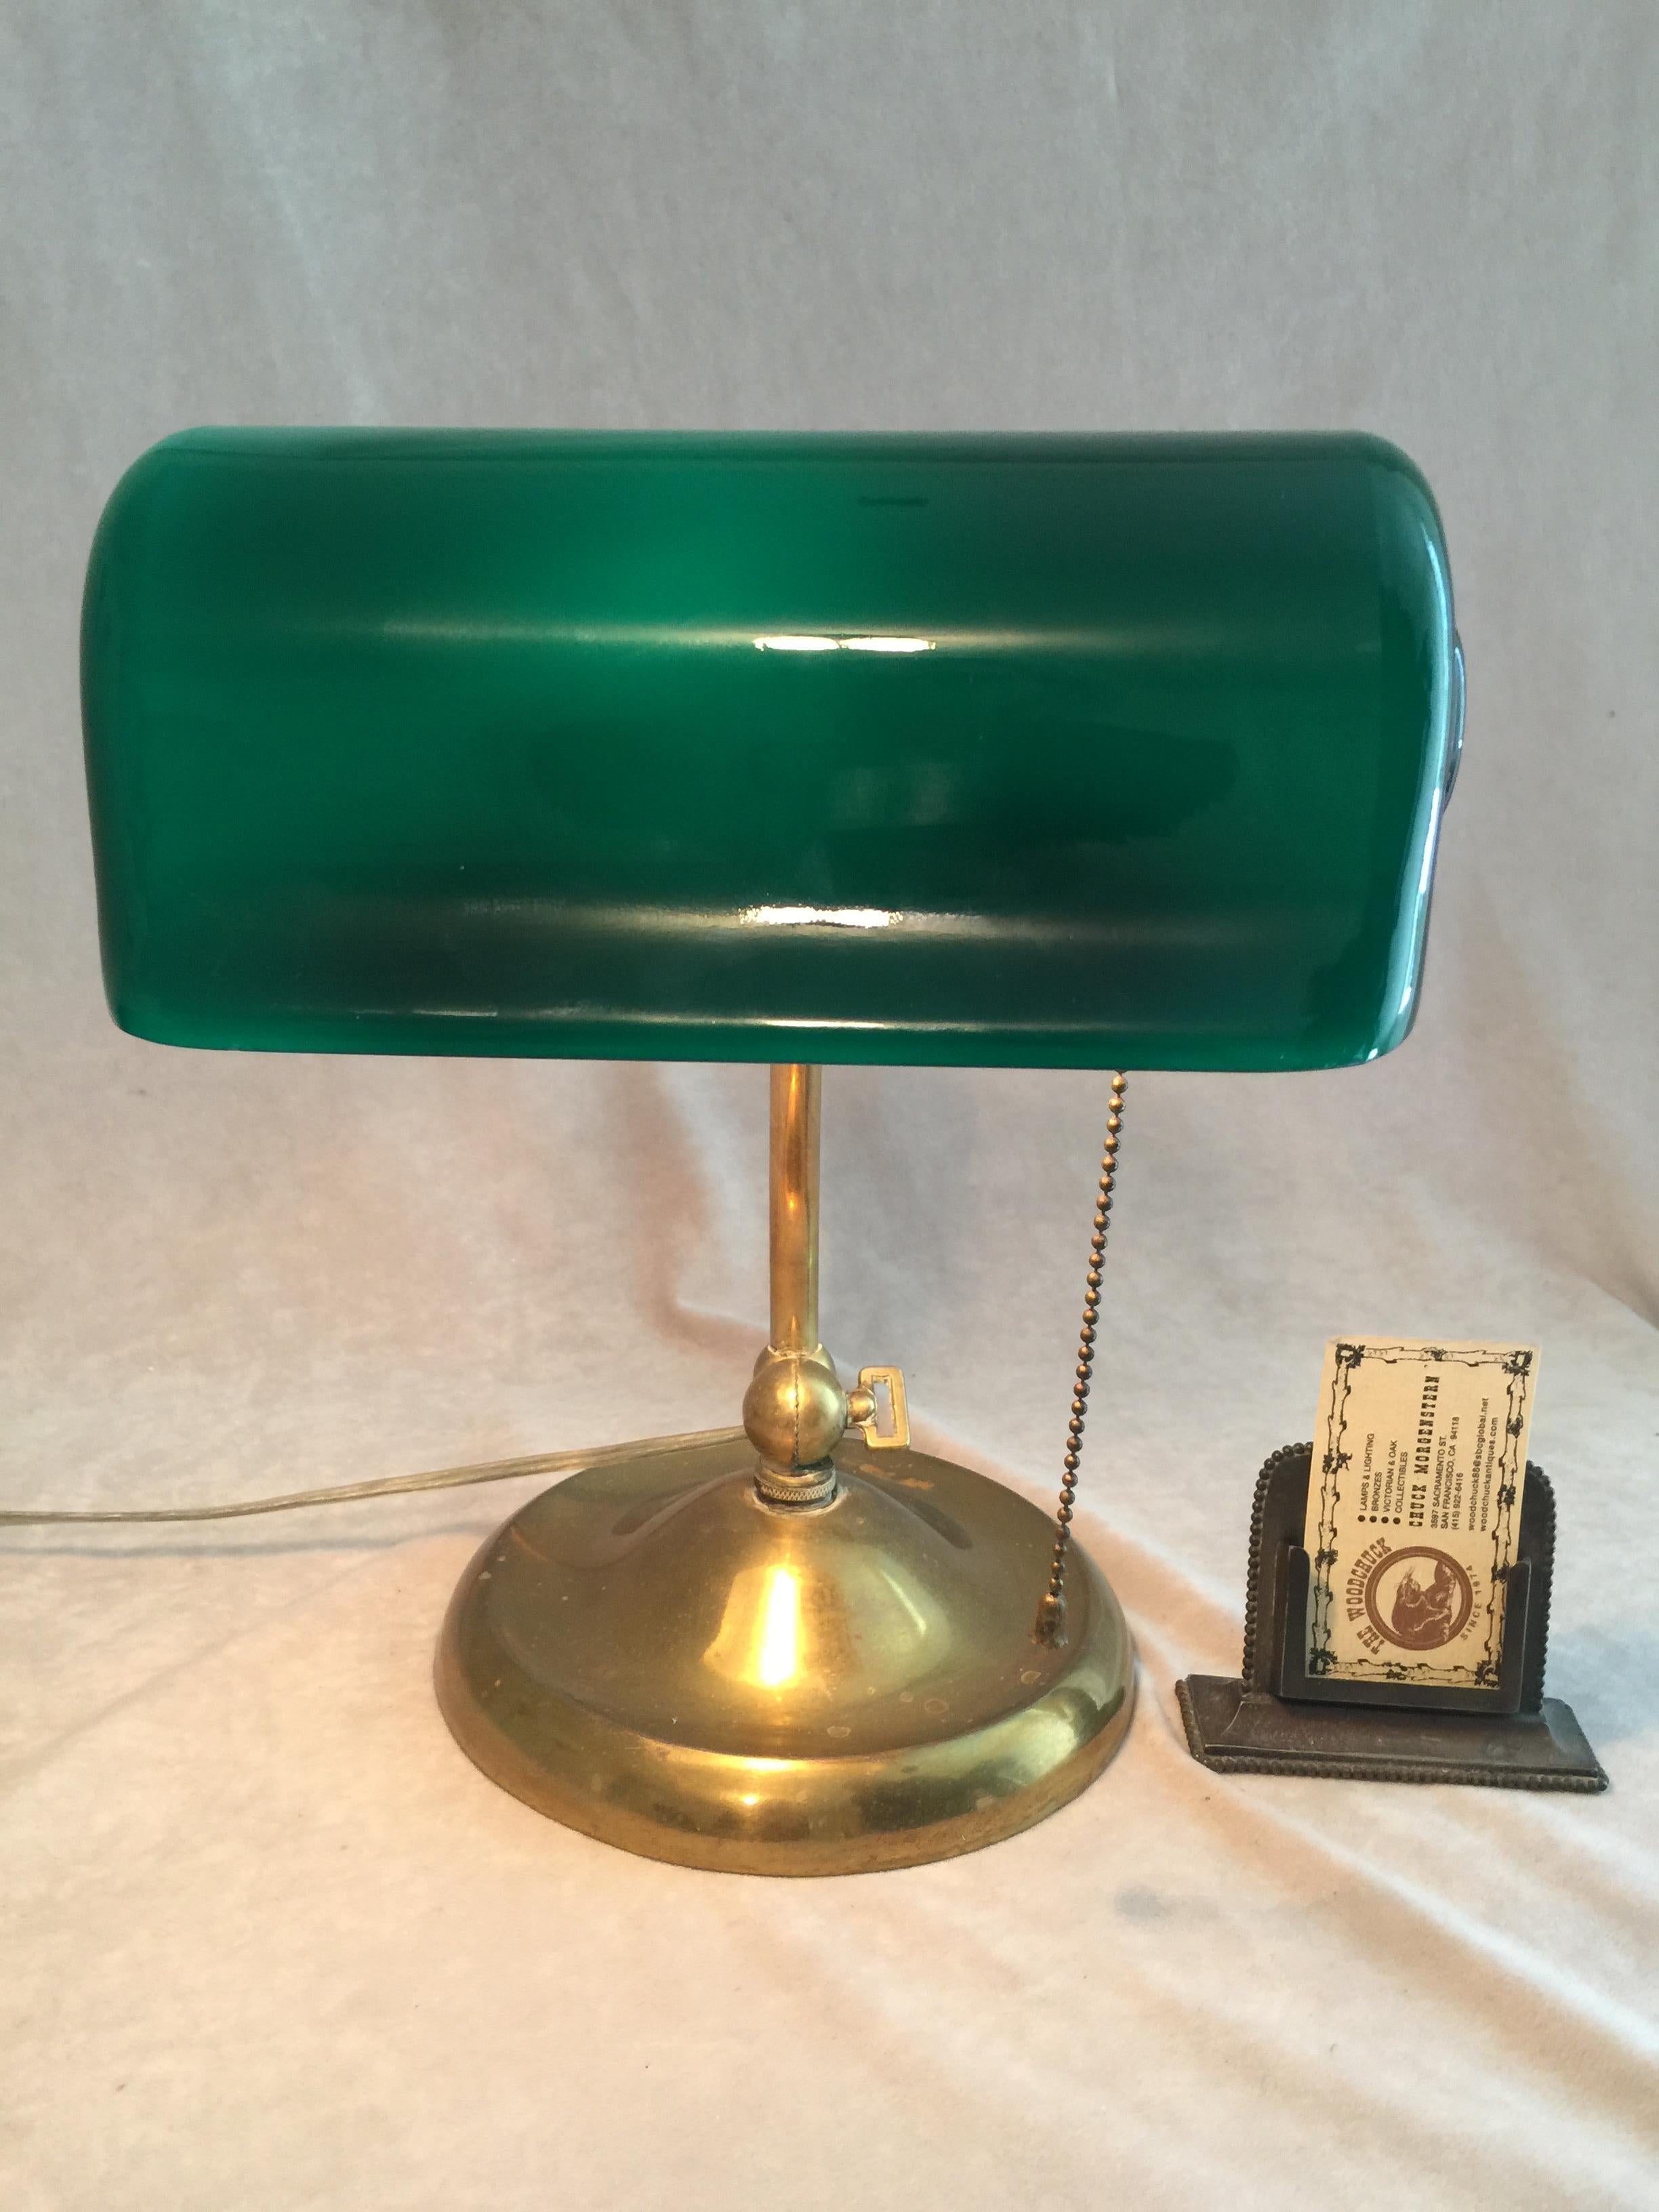 Banker's lamps are some of the most popular, useful and beautiful choices for the desk. Several companies produced these lamps at the early part of the 20th century. We favor Verdelite with it's concentric rings on the side of the glass, and the